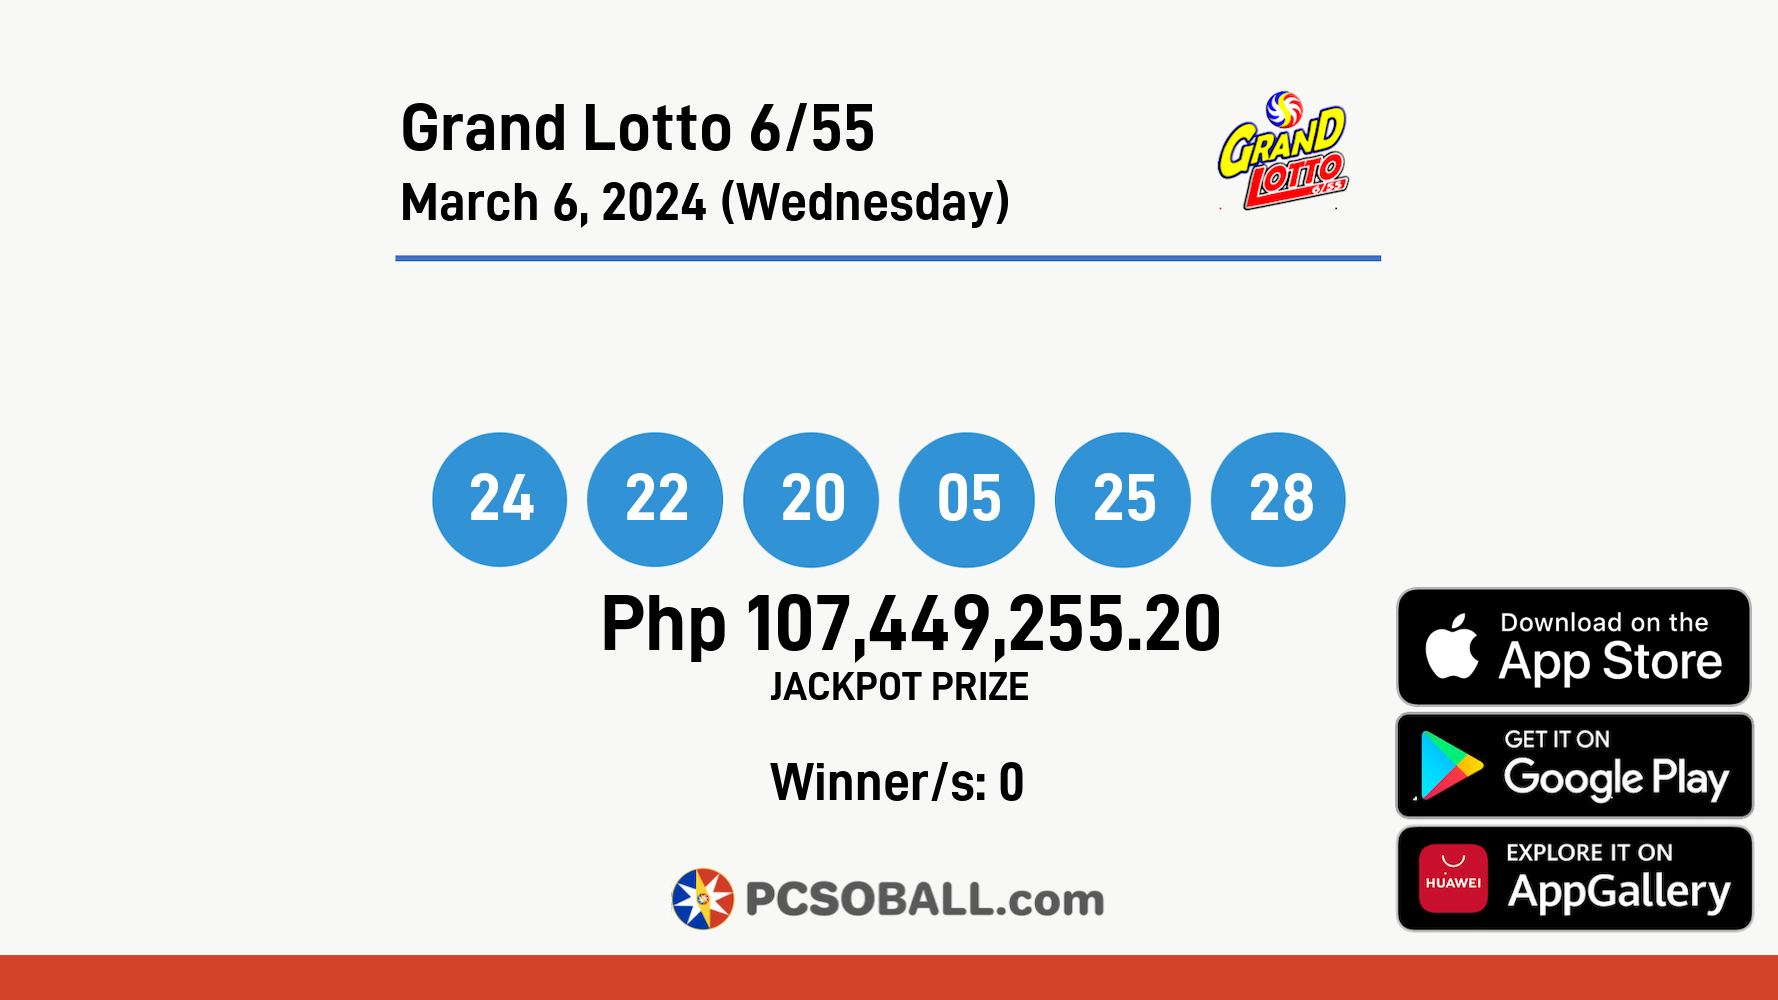 Grand Lotto 6/55 March 6, 2024 (Wednesday) Result